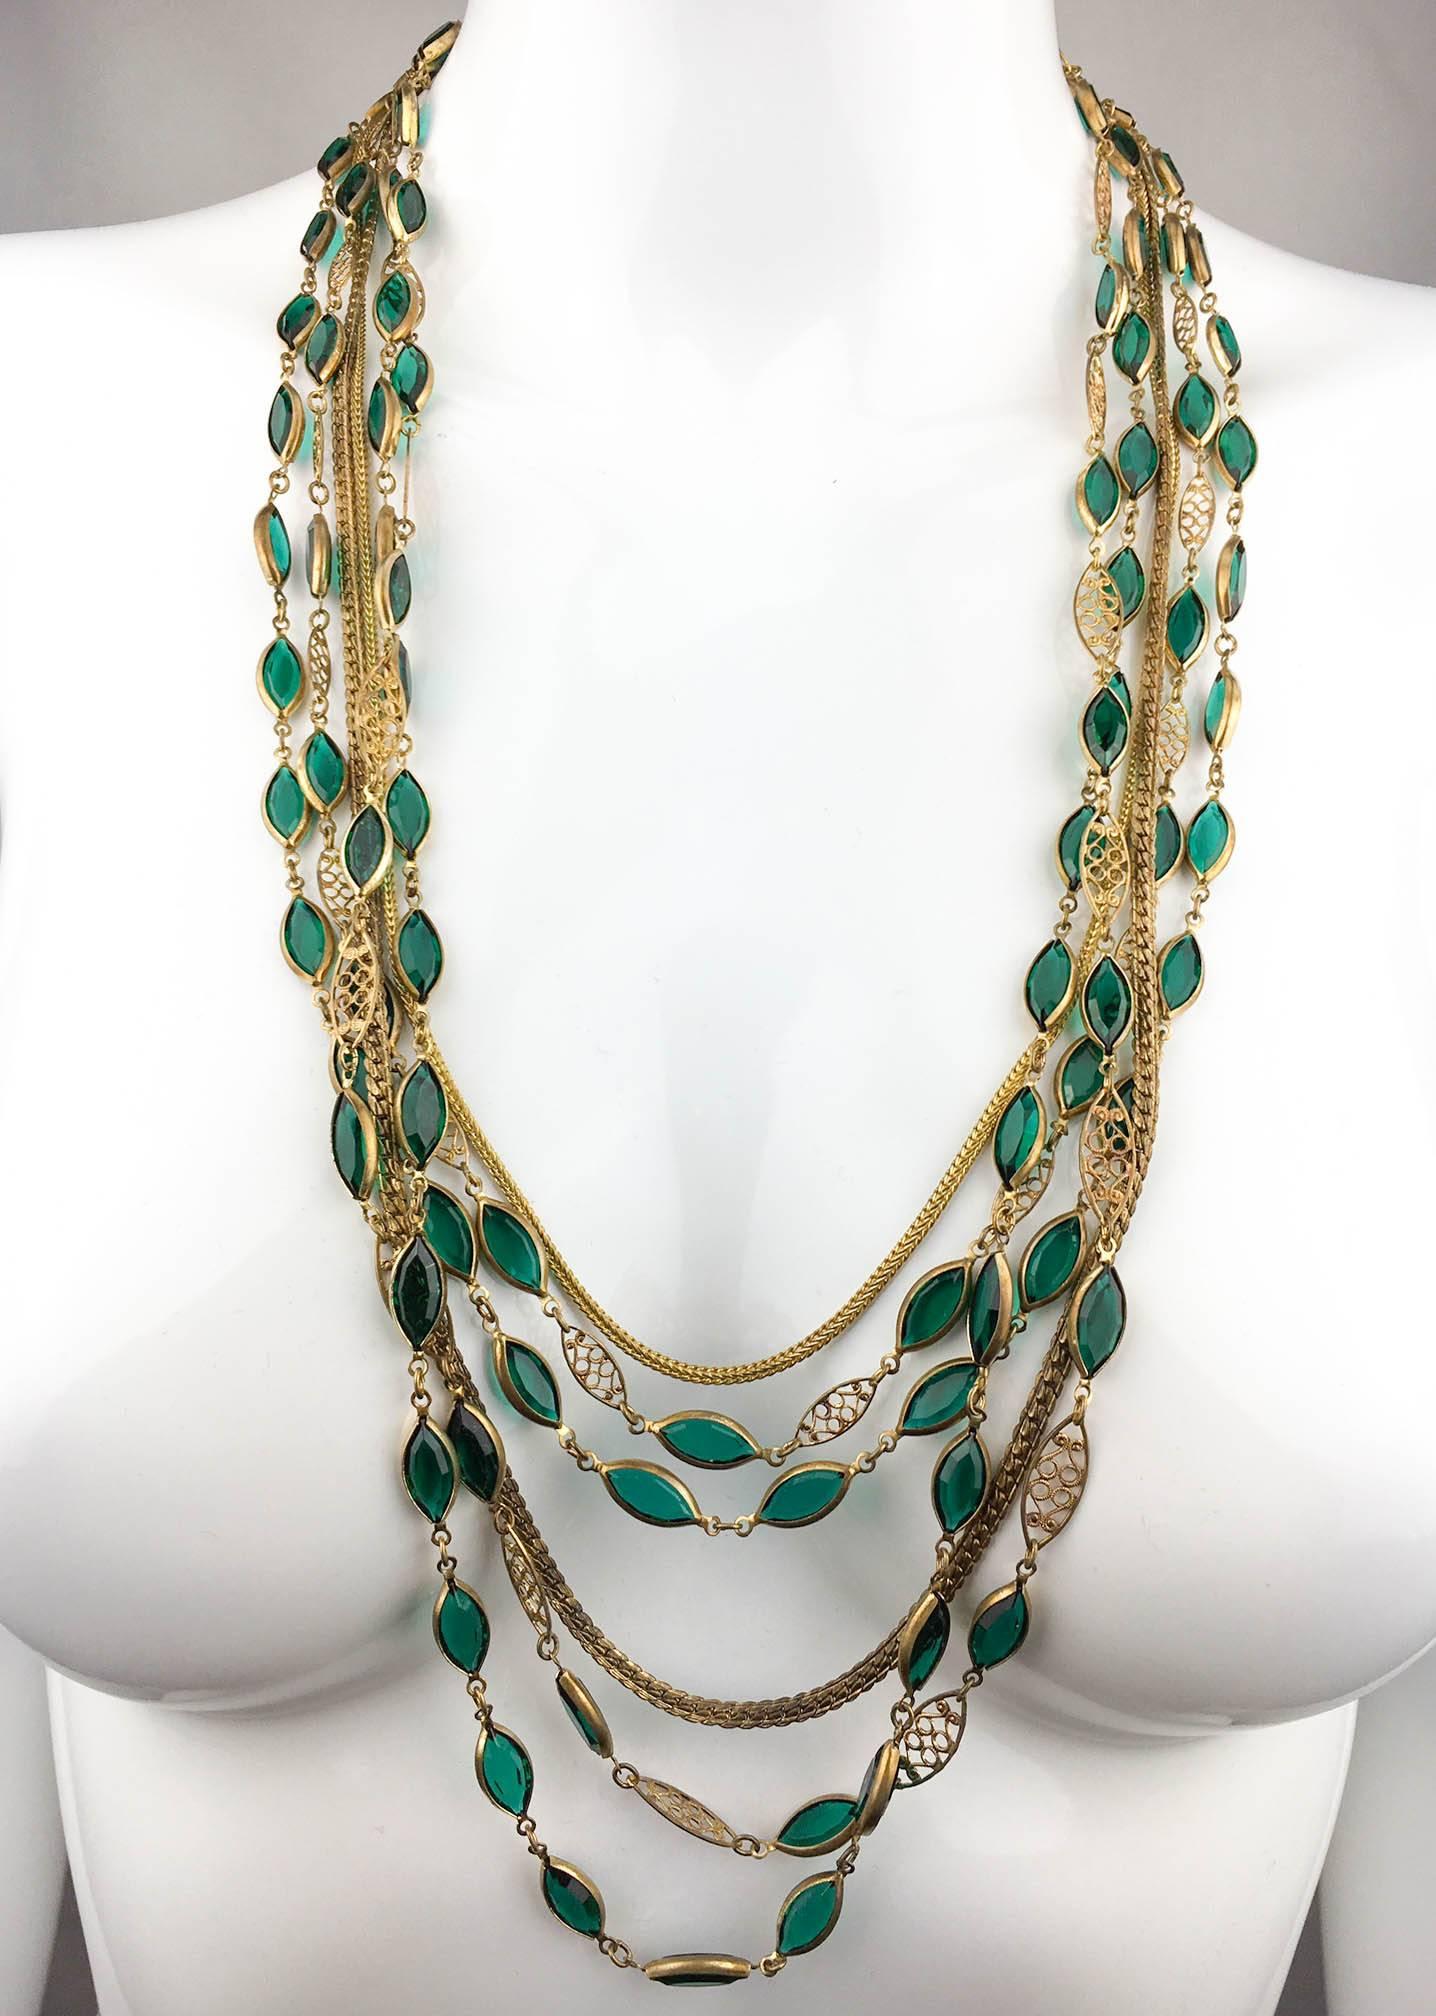 Multi-Strand Gold-Toned and Green Paste Necklace - 1940s/1950s For Sale 4